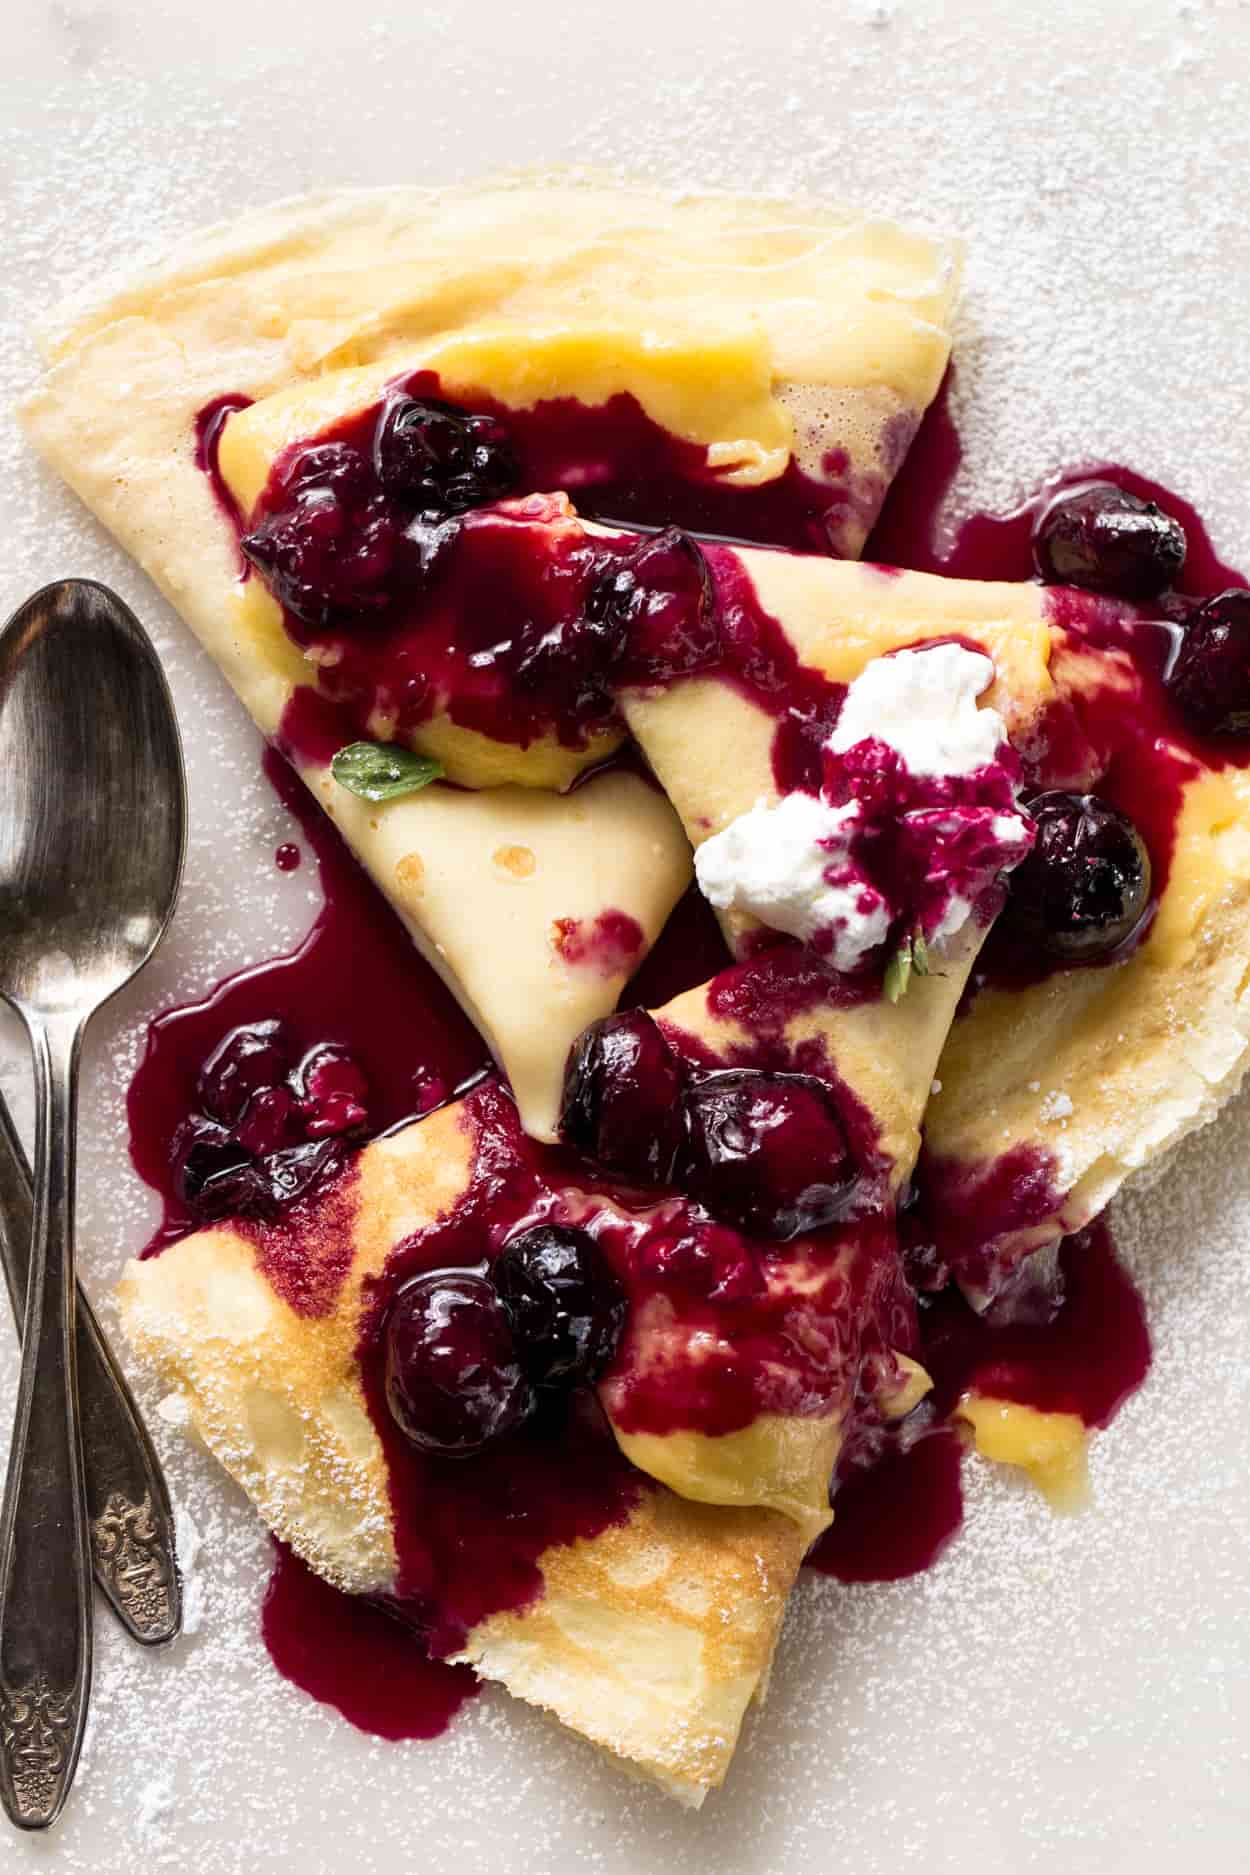 Crepes recipe with custard filling, whipped cream, and blueberry sauce. The best crepe recipe!